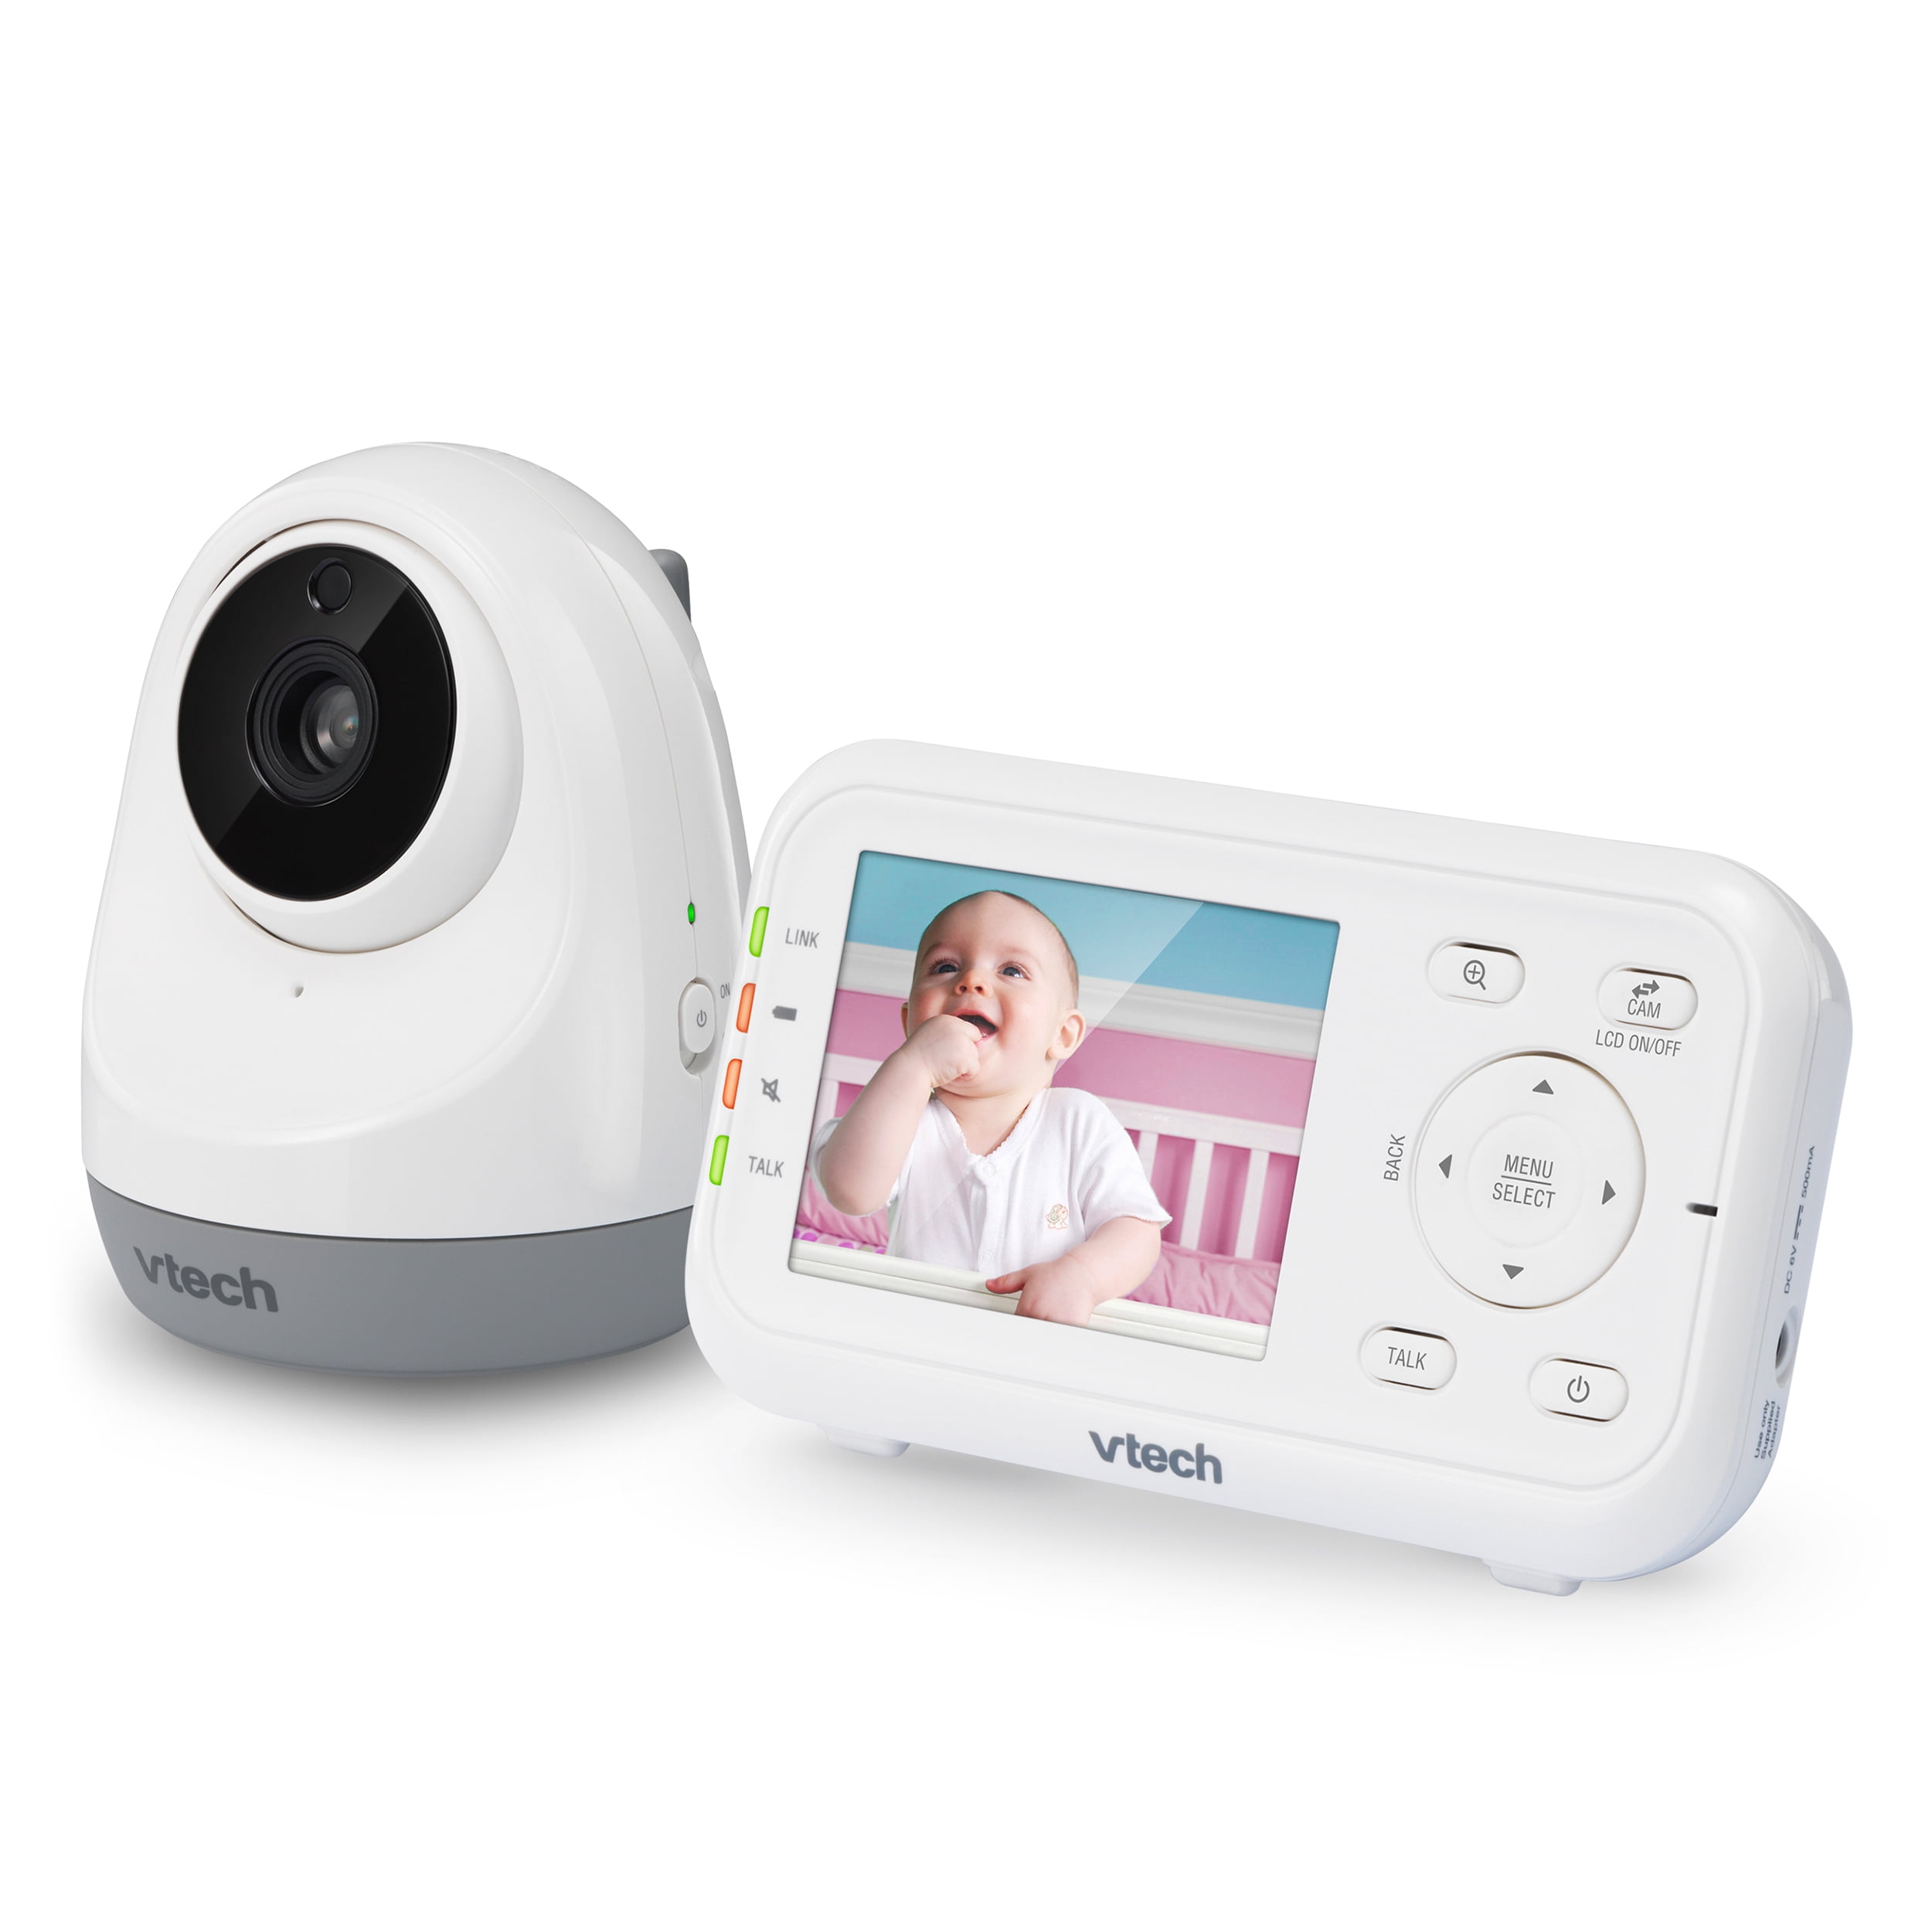 VTech 2.8” Digital Video Baby Monitor with Night Light White